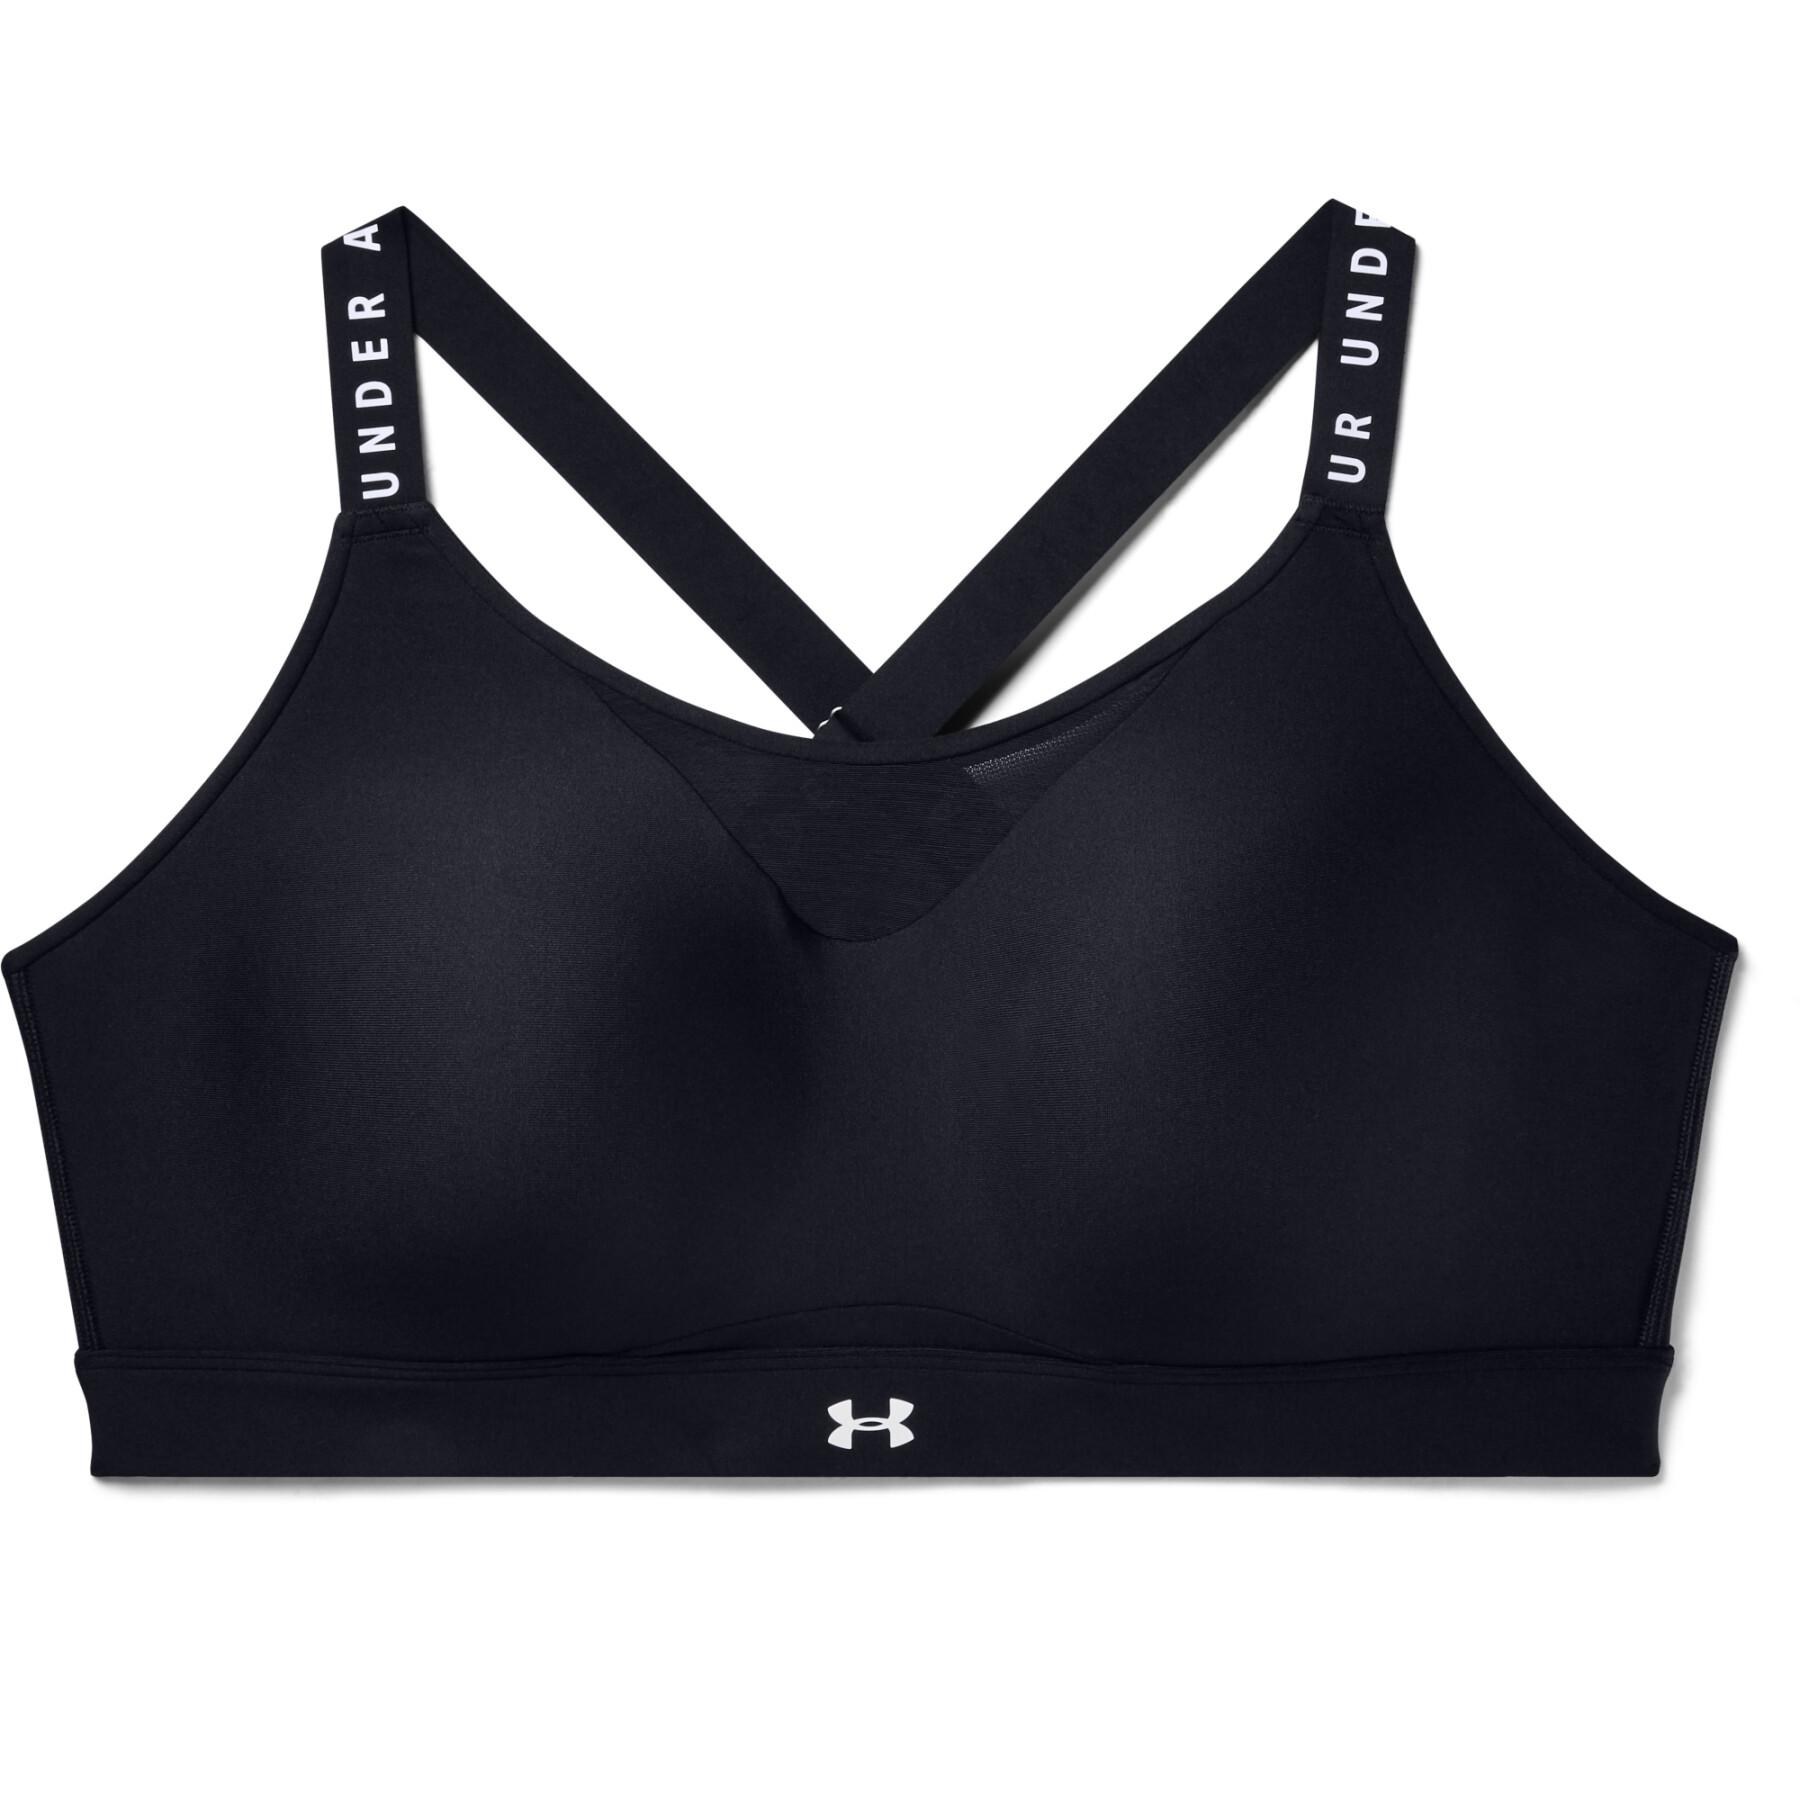 High support bra large size woman Under Armour Infinity